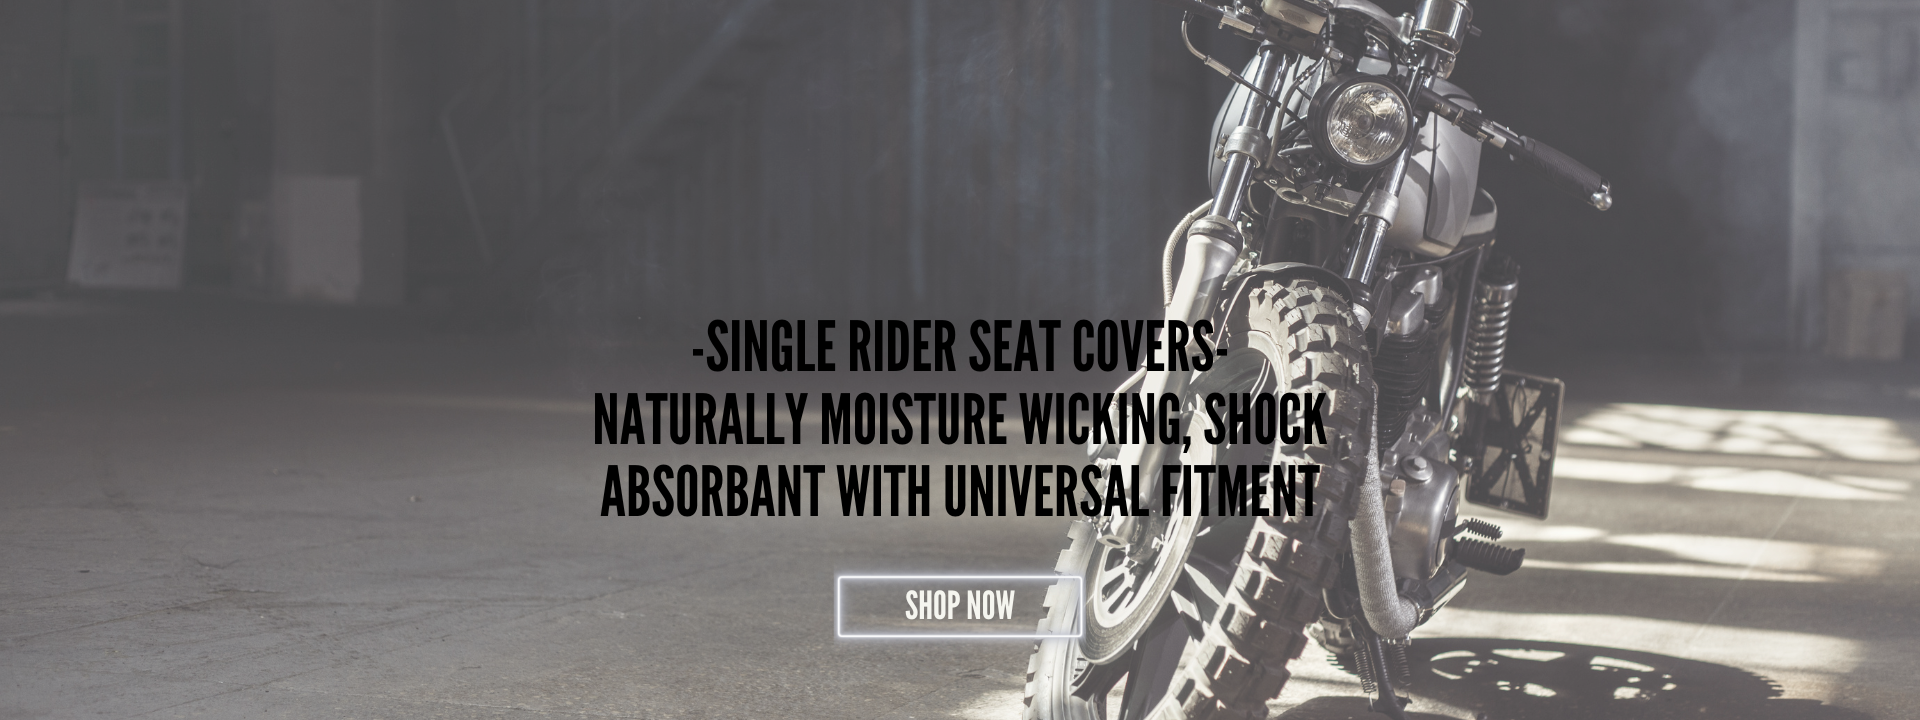 LV SEAT COVER MOTORCYCLE UNIVERSAL